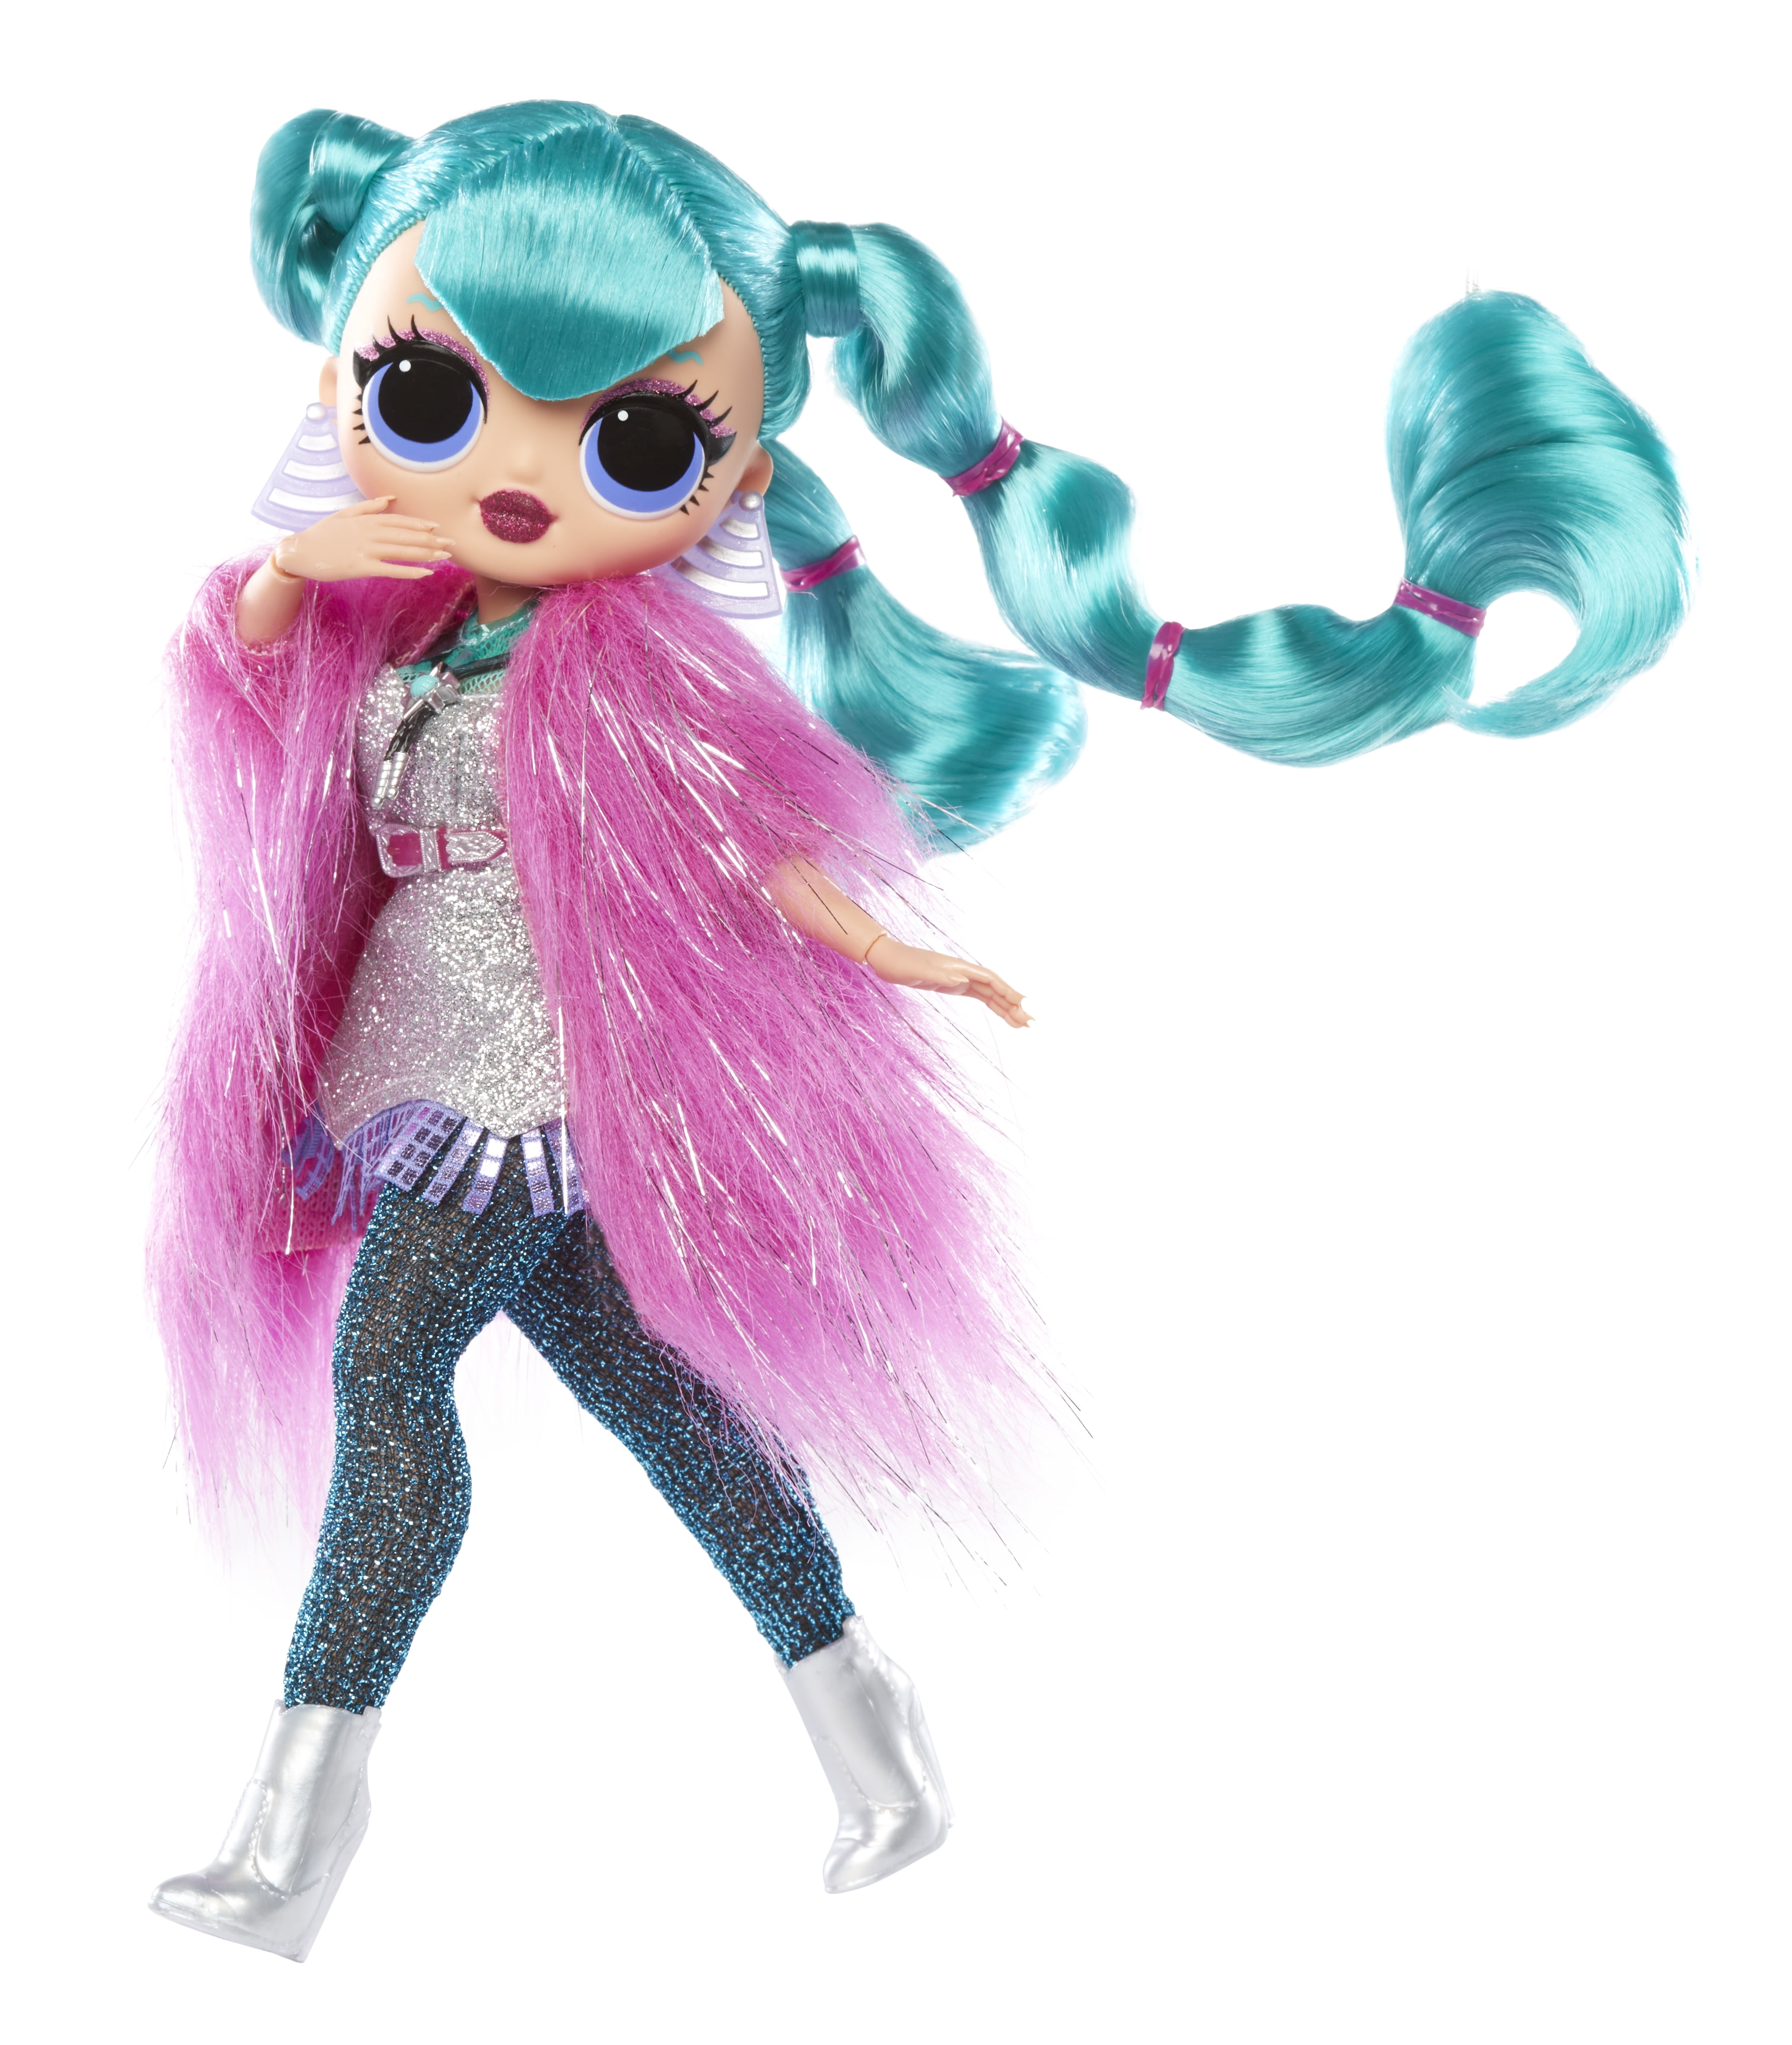 LOL Surprise O.M.G. Cosmic Nova Fashion Doll with multiple surprises and Fabulous Accessories  Great Gift for Kids Ages 4+